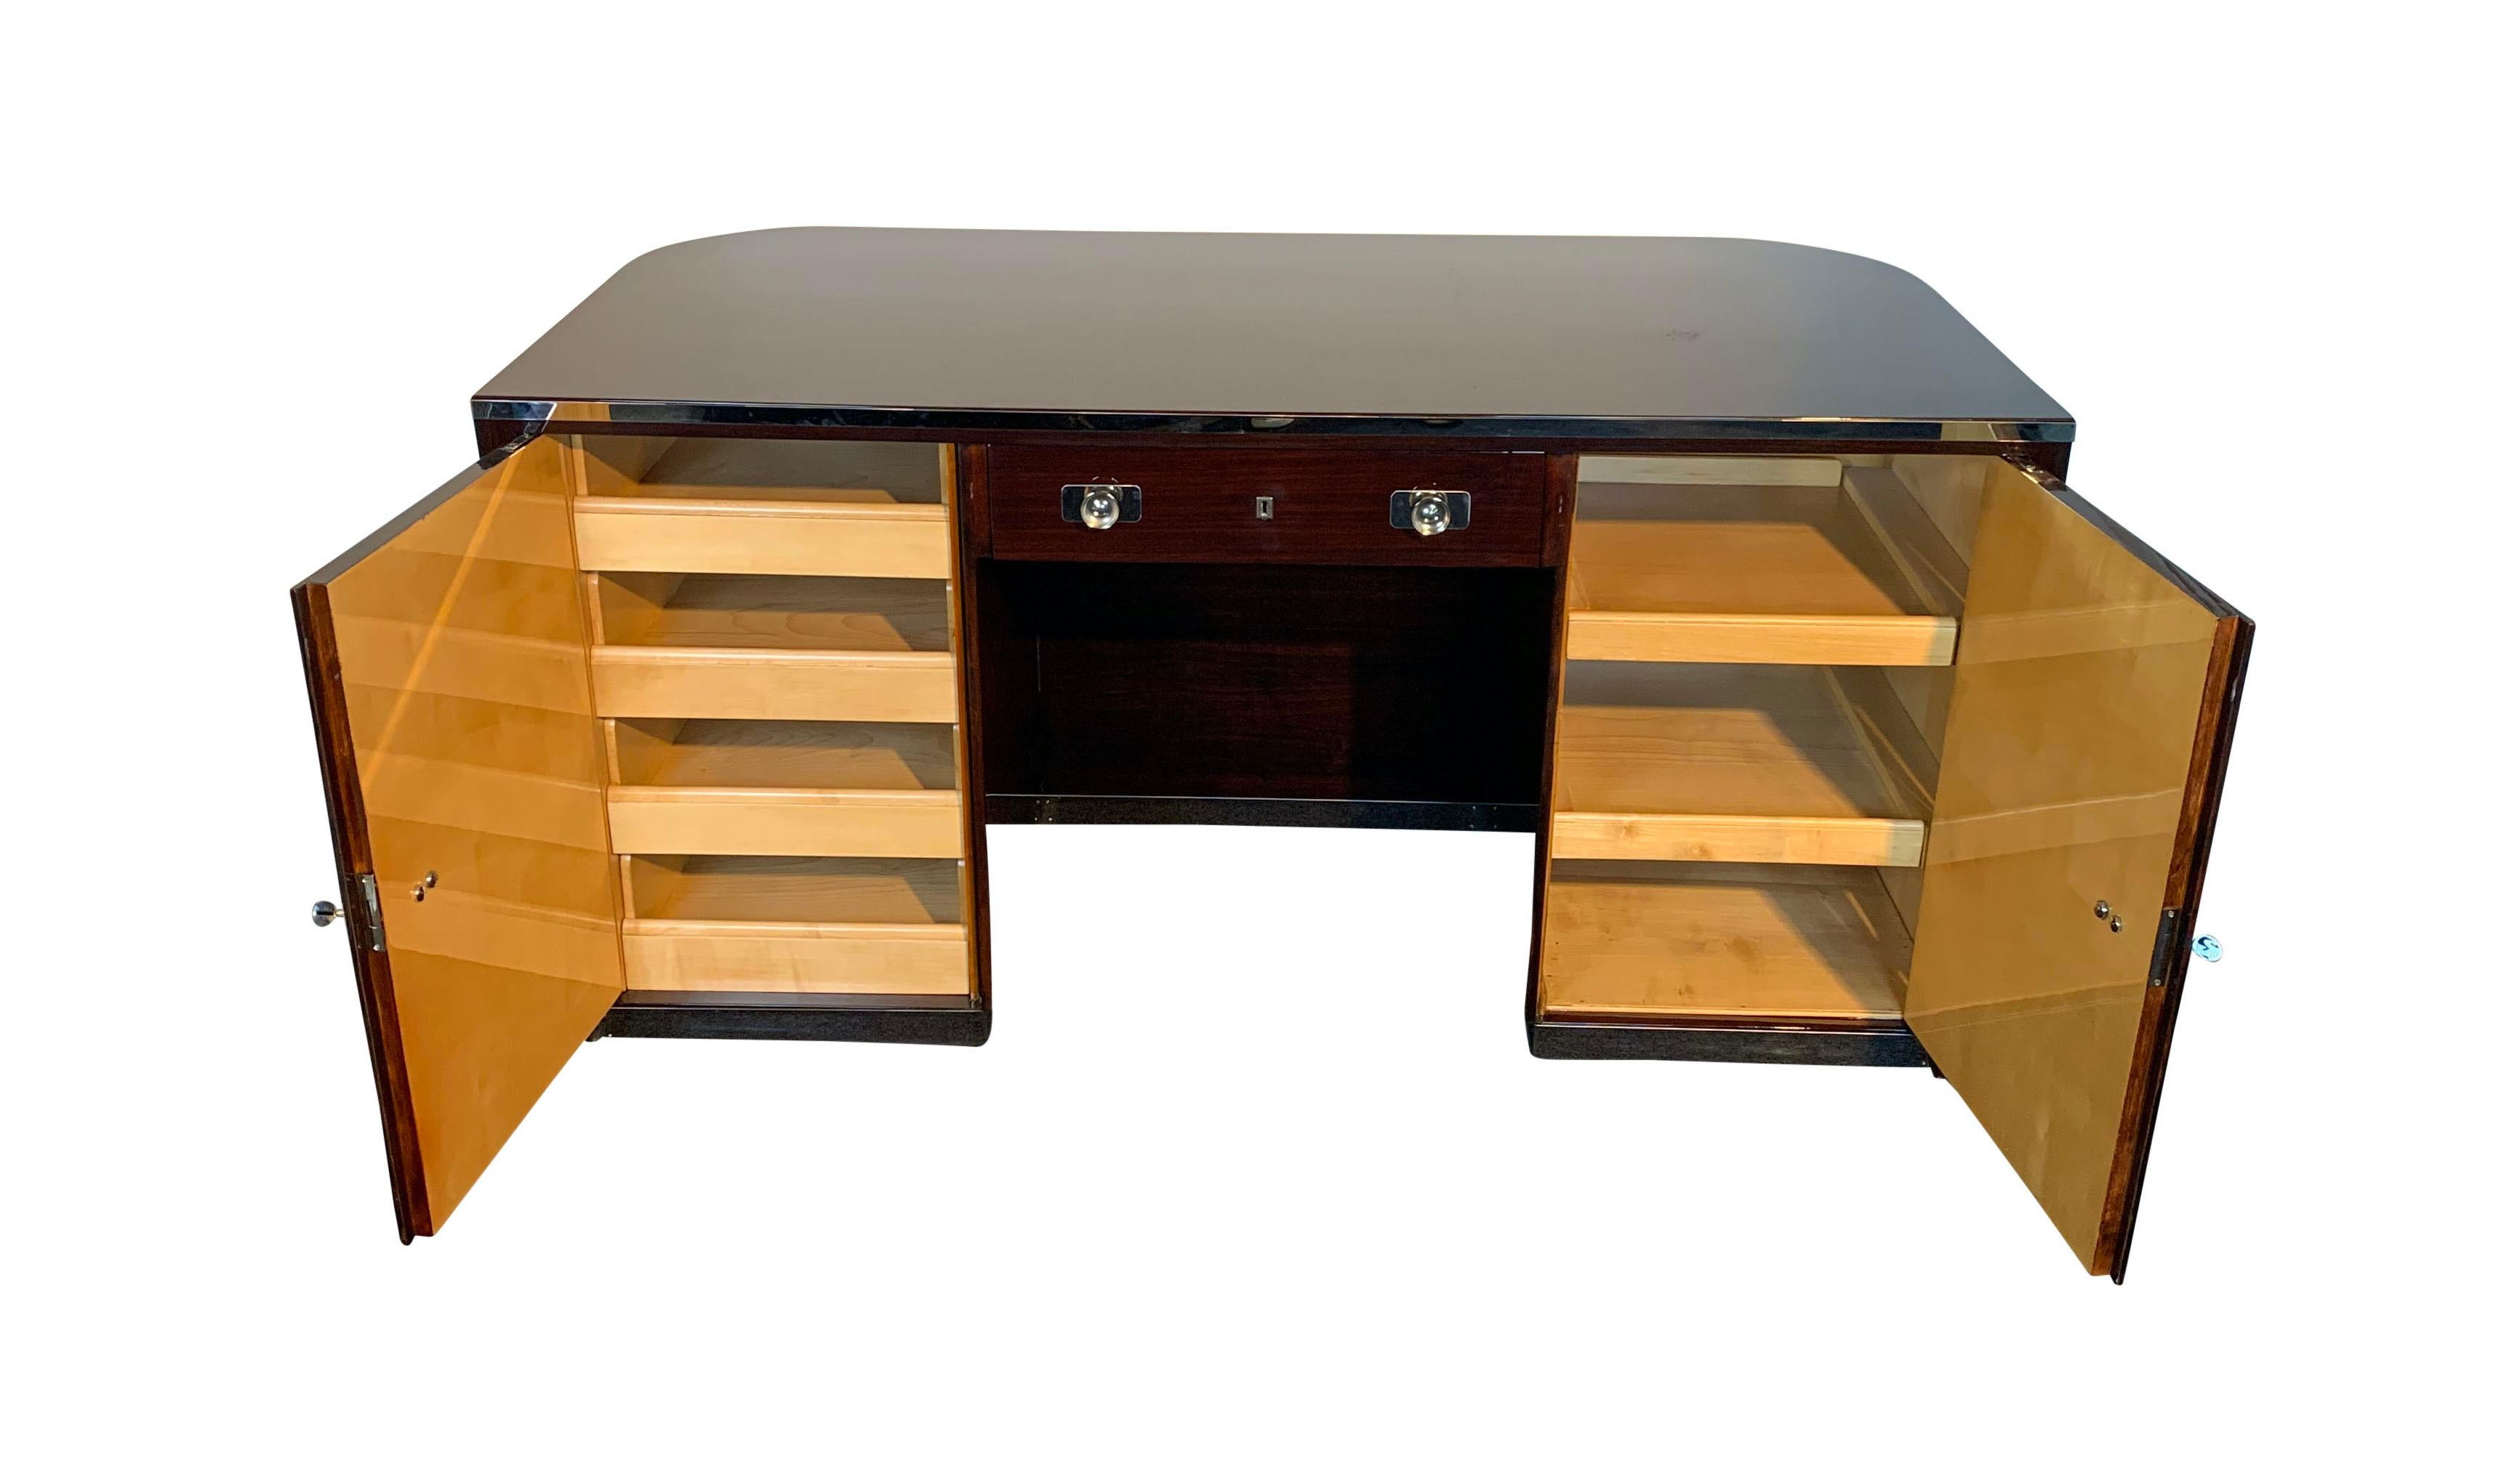 Early 20th Century Lacquered Rosewood Desk by Erich Diekmann, Bauhaus, Germany, 1920s For Sale